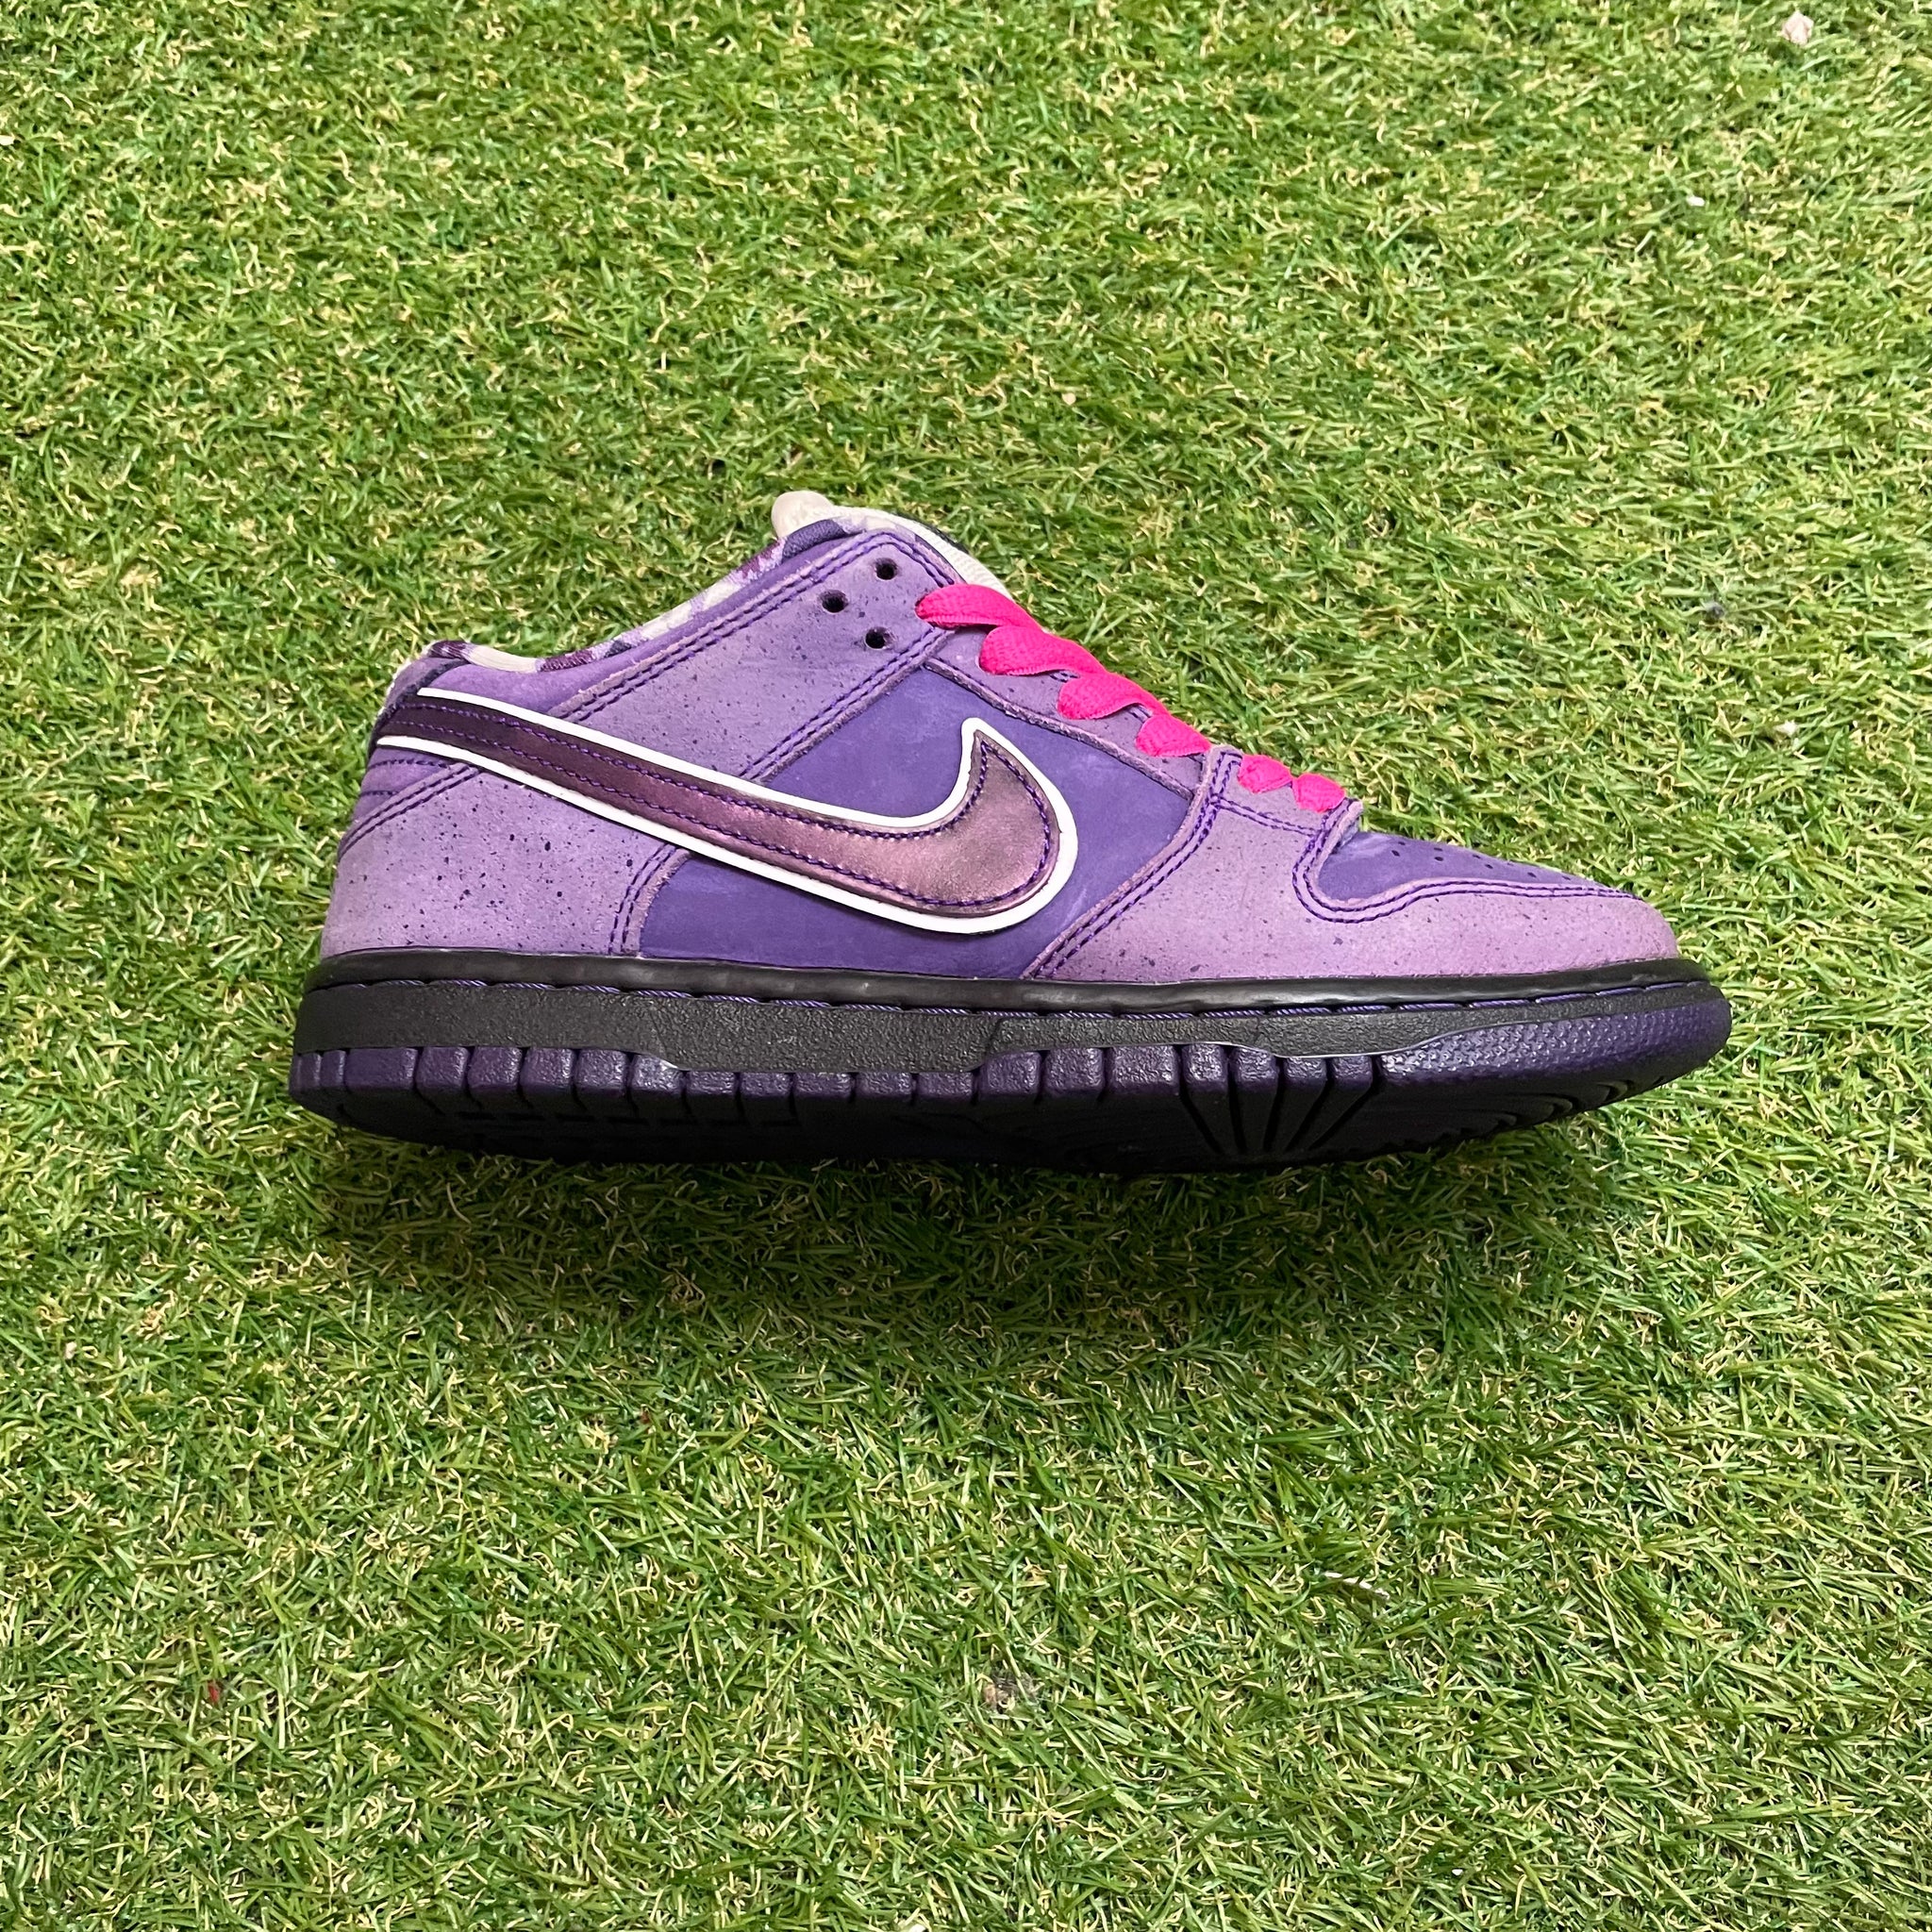 PREOWNED CONCEPTS X DUNK LOW SB 'PURPLE LOBSTER'